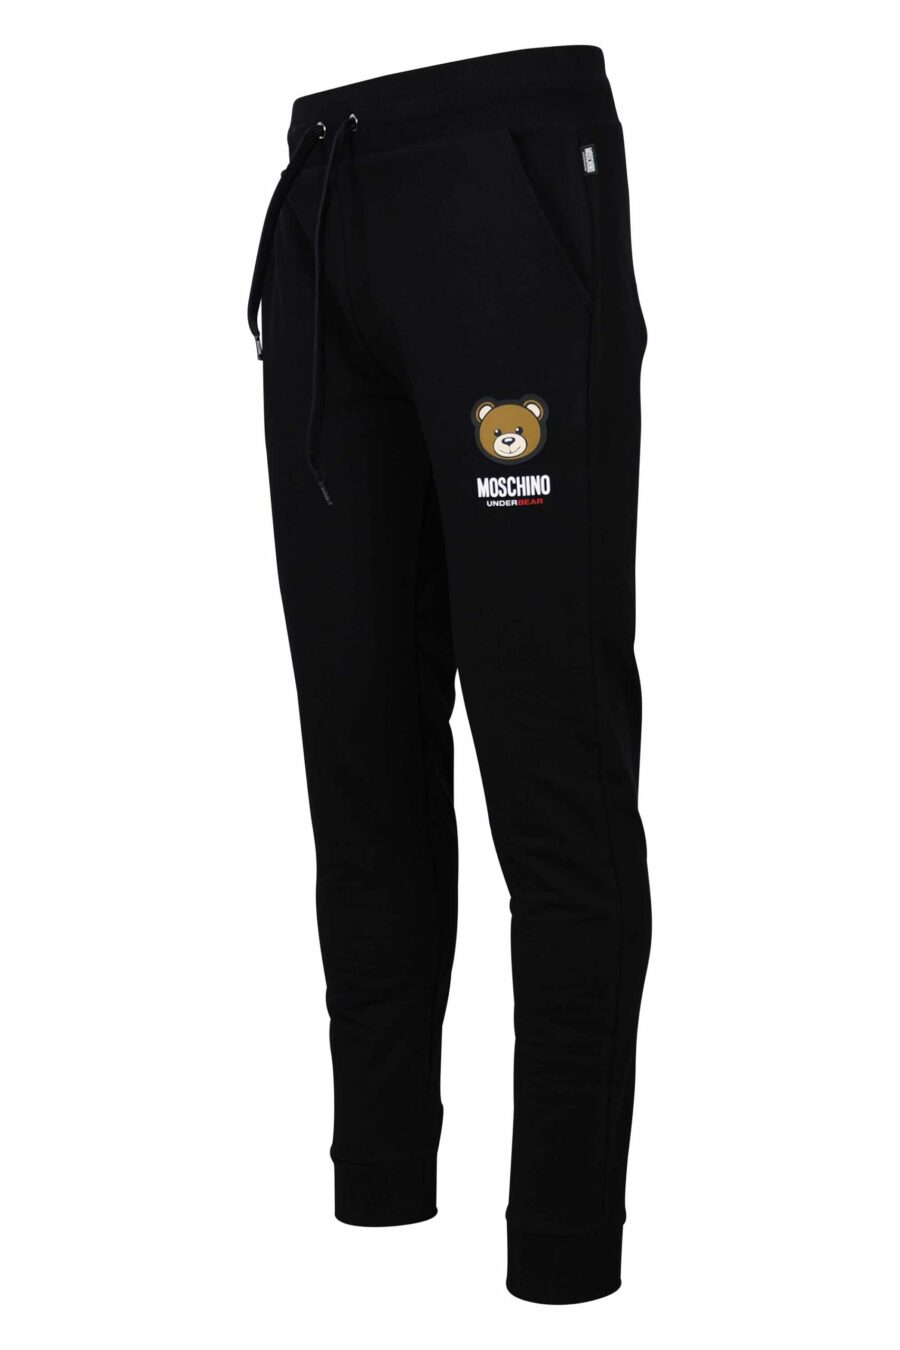 Tracksuit bottoms black with "underbear" bear logo patch - 667113019949 1 scaled